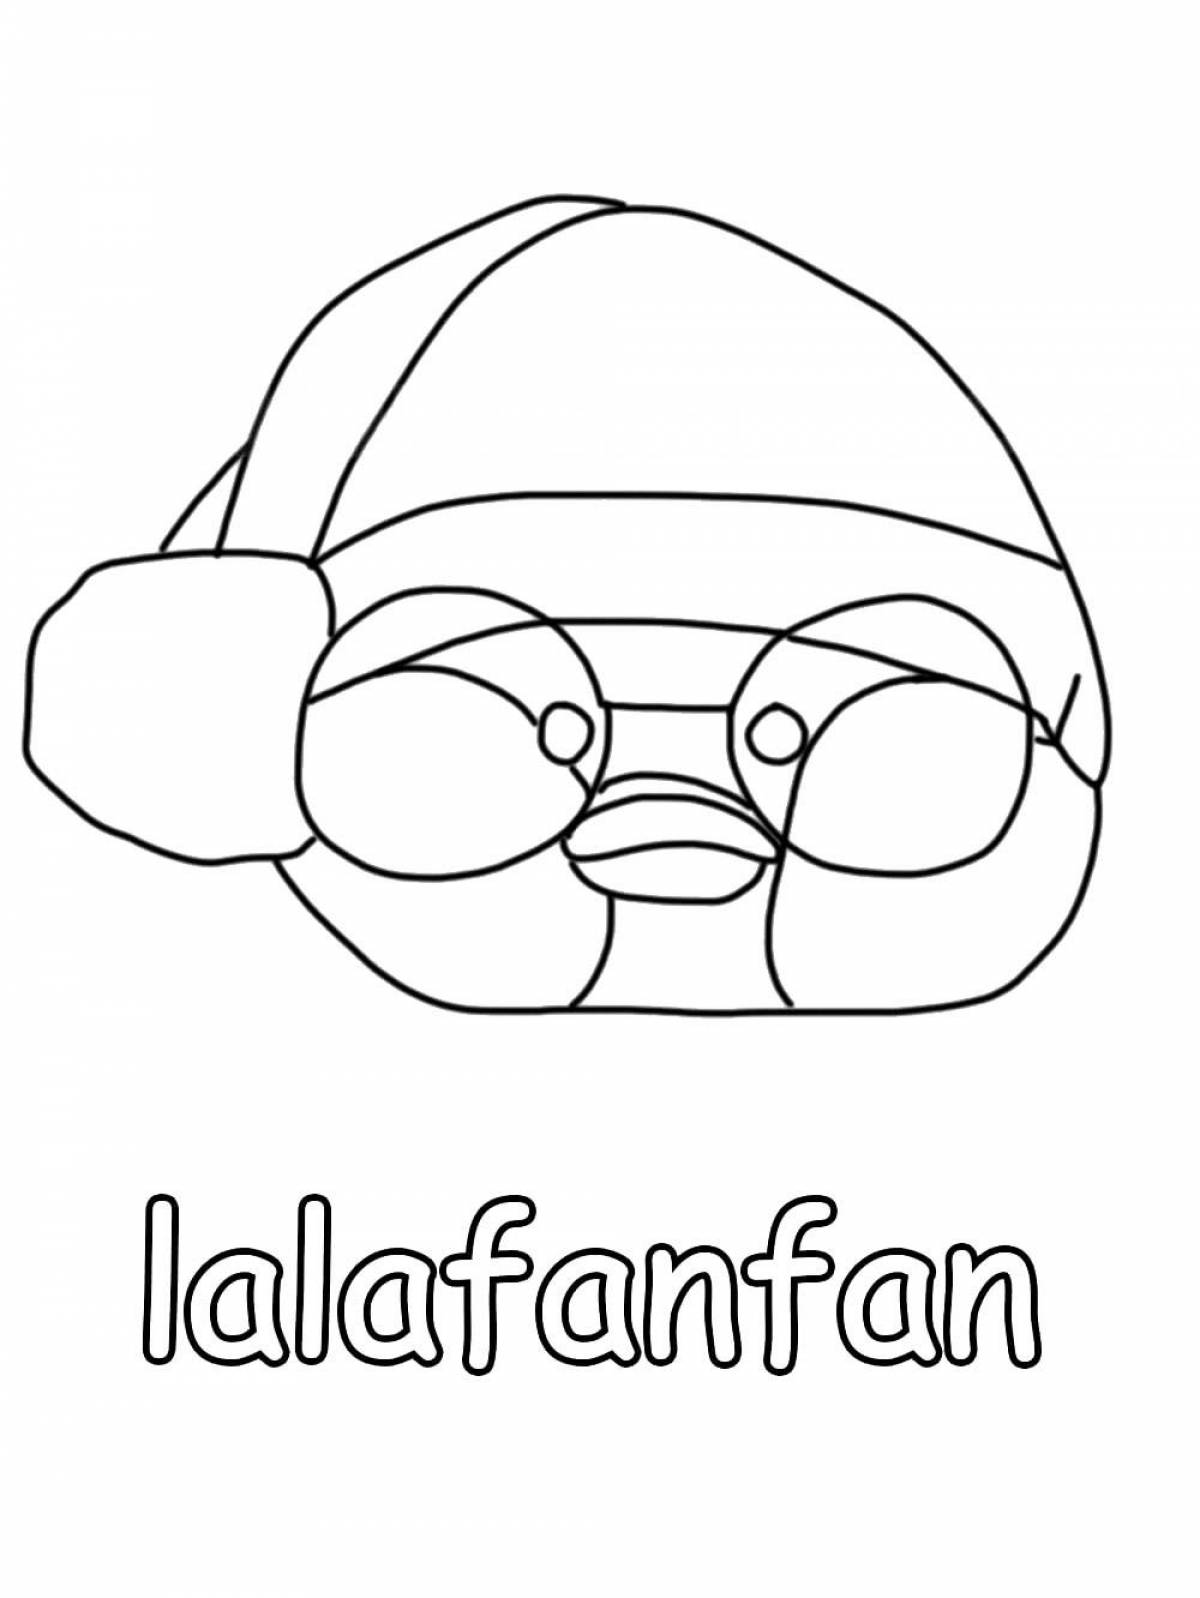 Colorful lalaphan duck coloring page